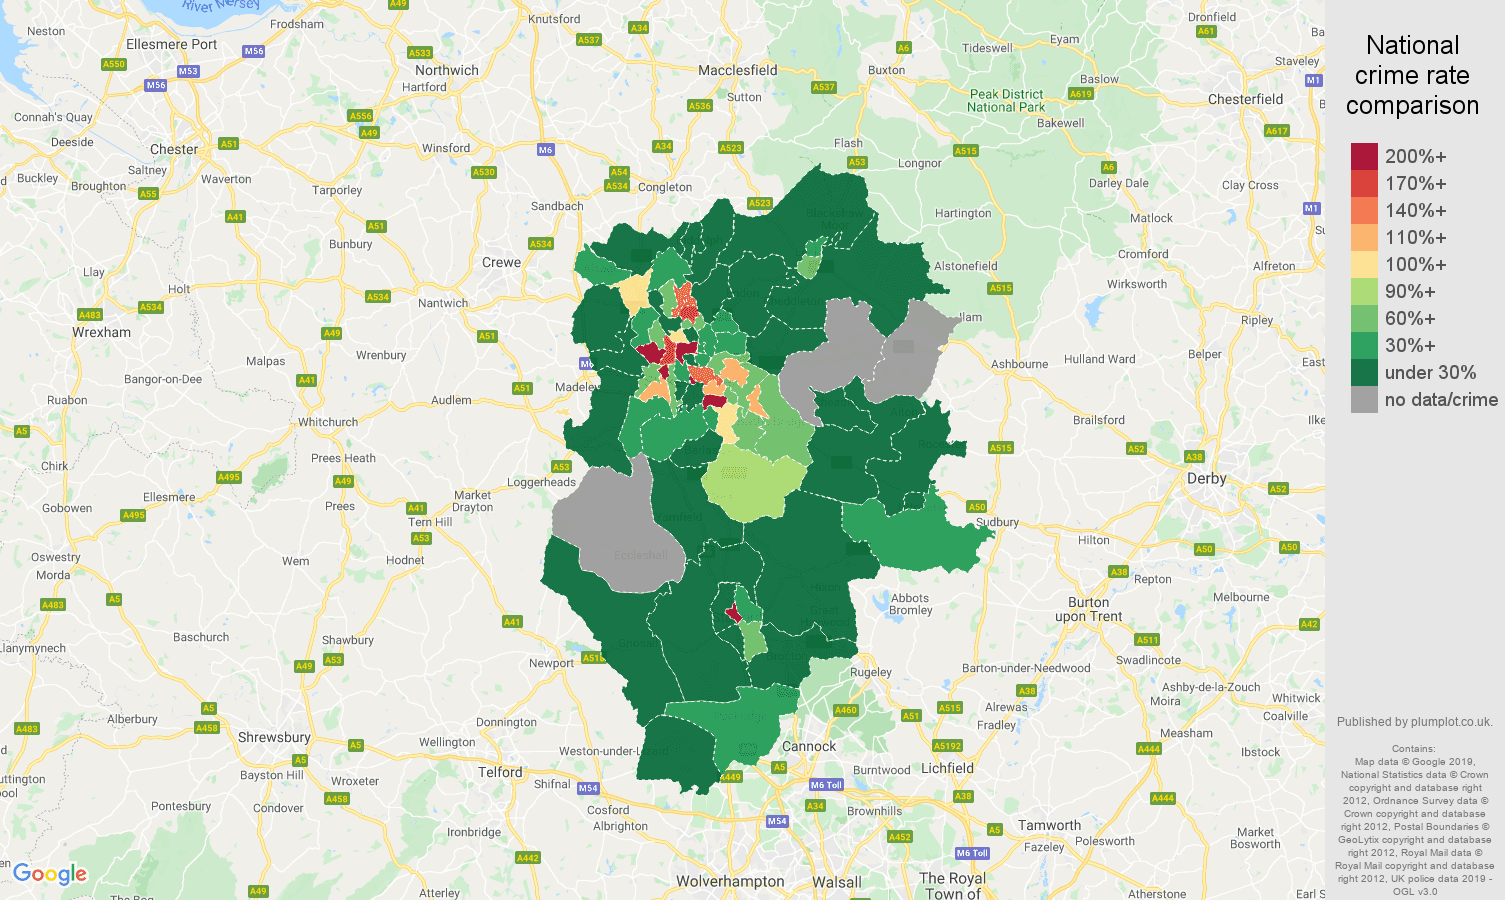 Stoke on Trent shoplifting crime rate comparison map